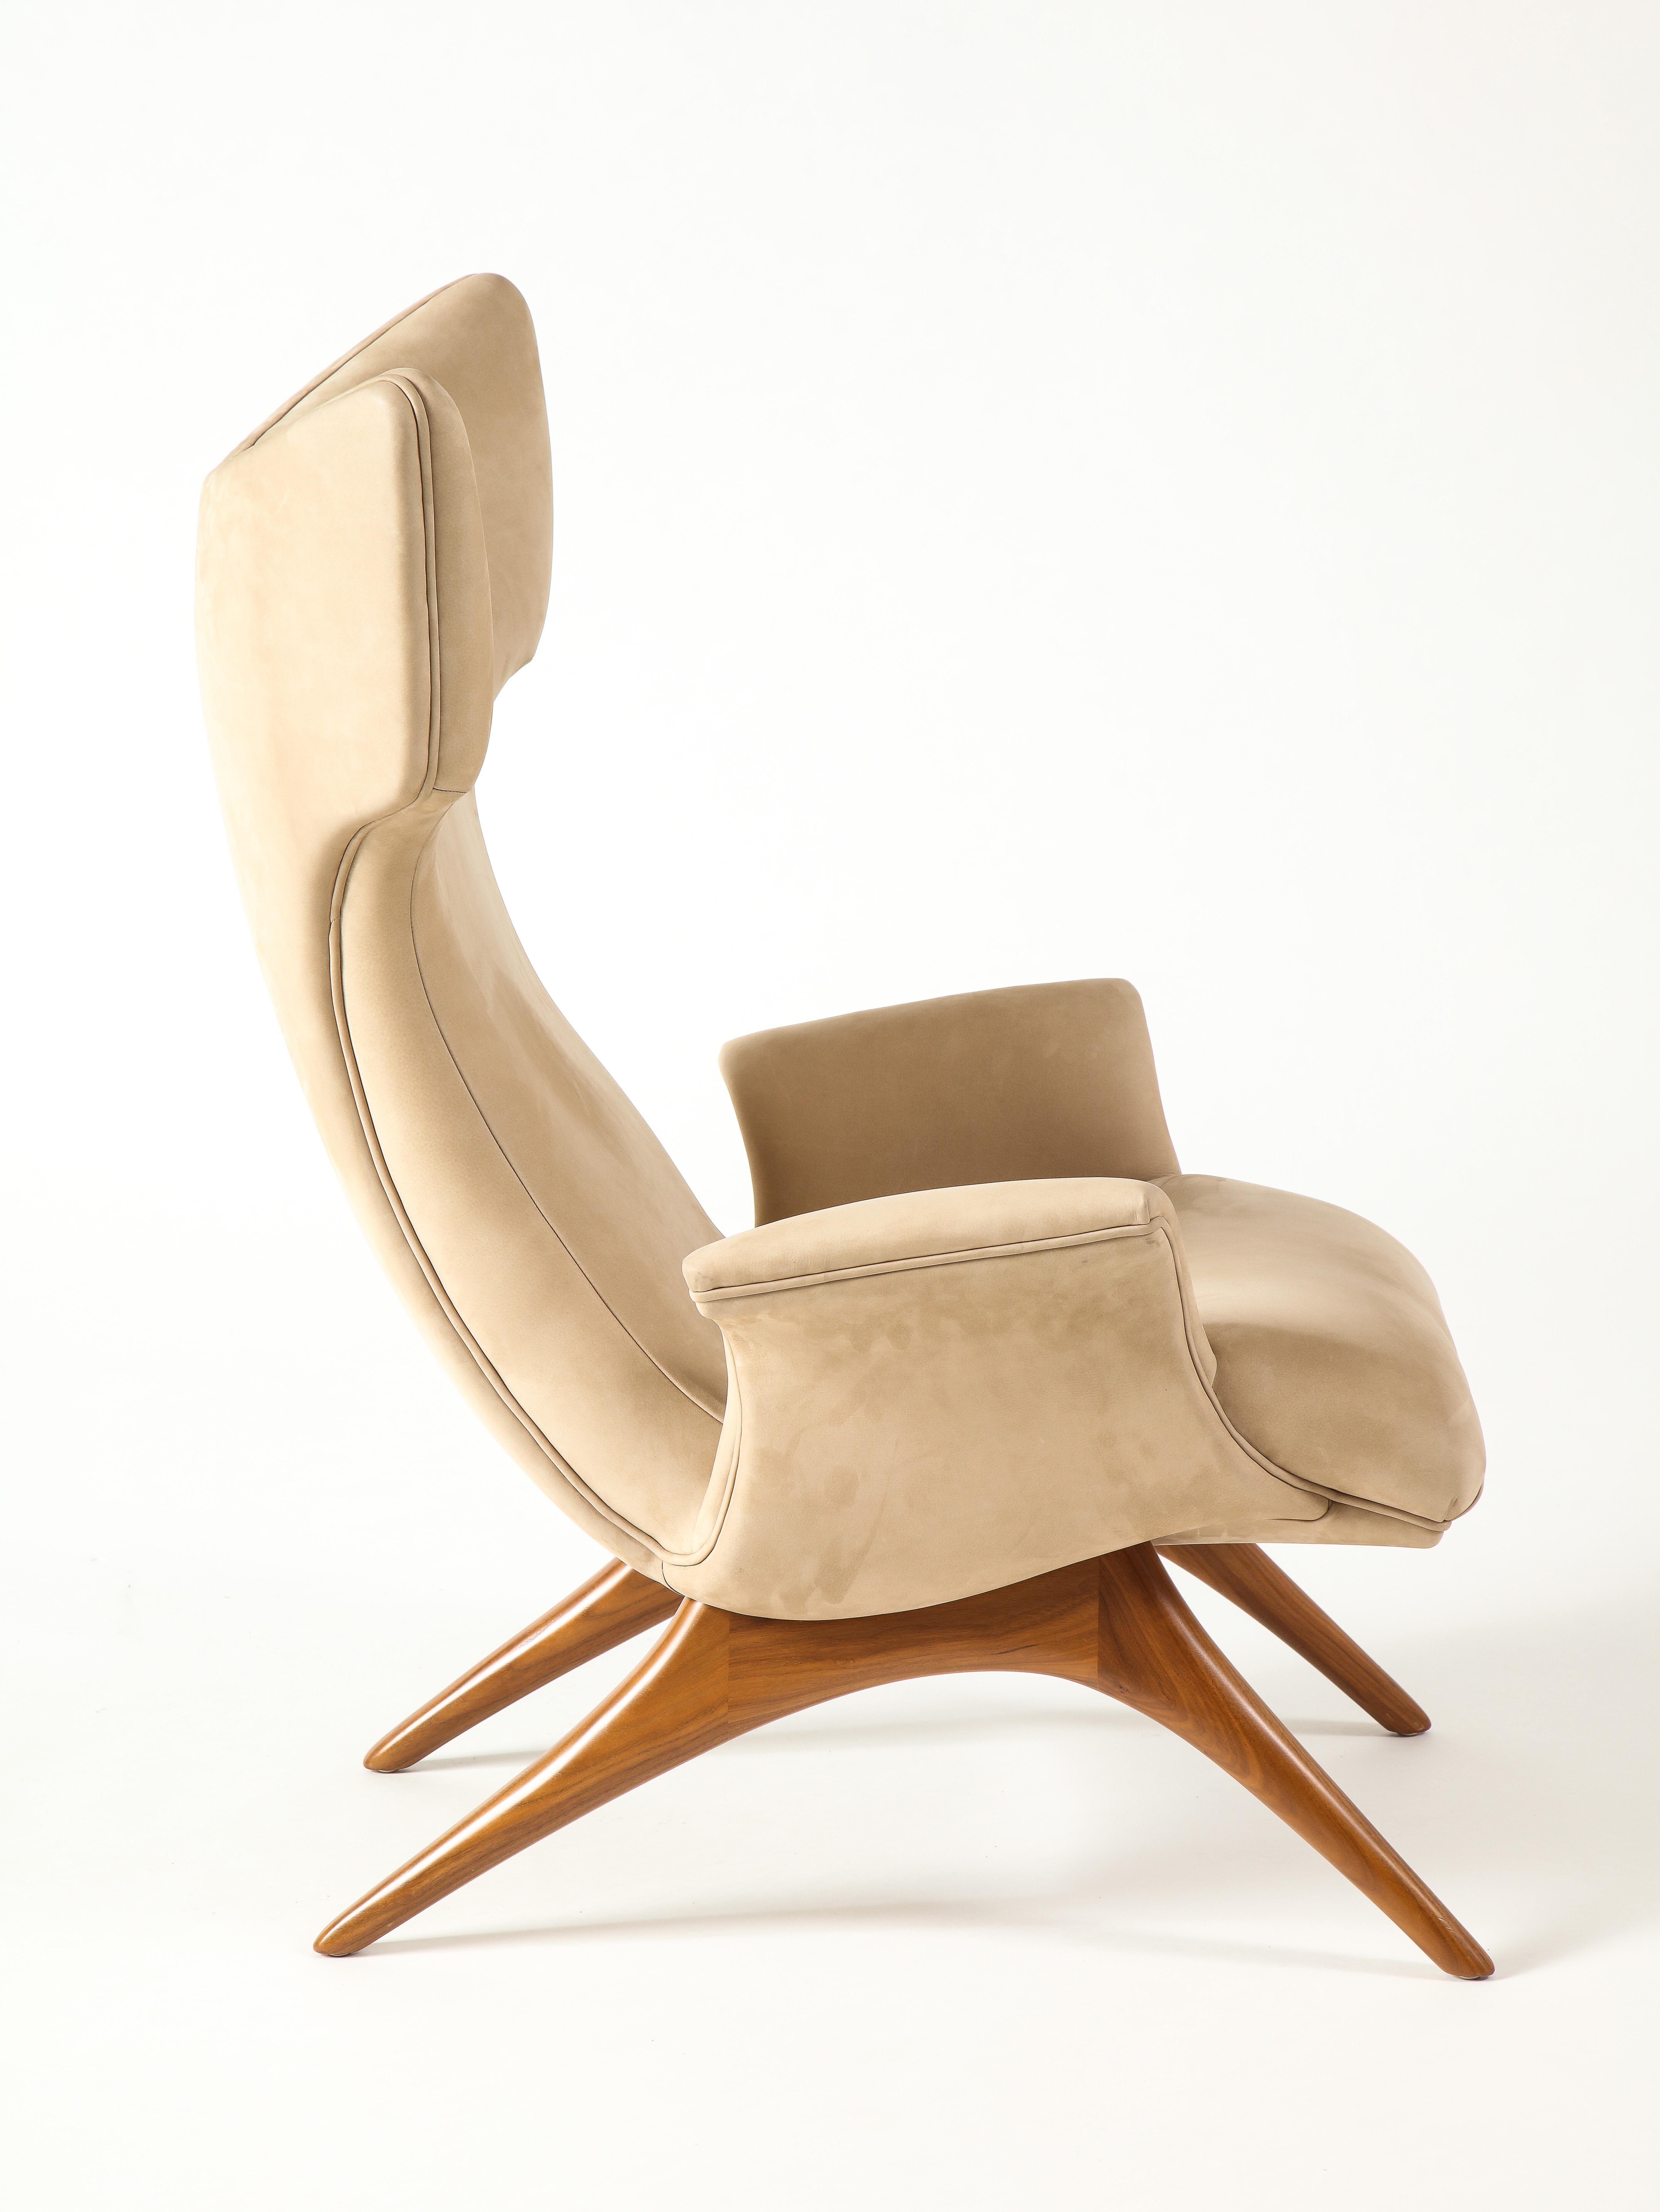 Vladimir Kagan Ondine Chair with Sueded Leather Upholstery & Natural Walnut Base 8